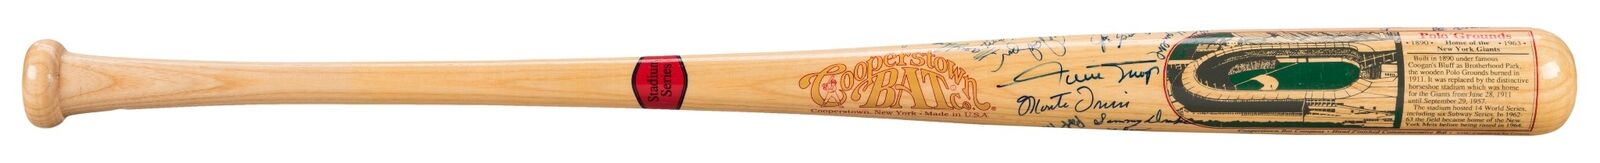 Willie Mays New York Giants Hall Of Fame Signed Cooperstown Bat 32 Sigs JSA COA